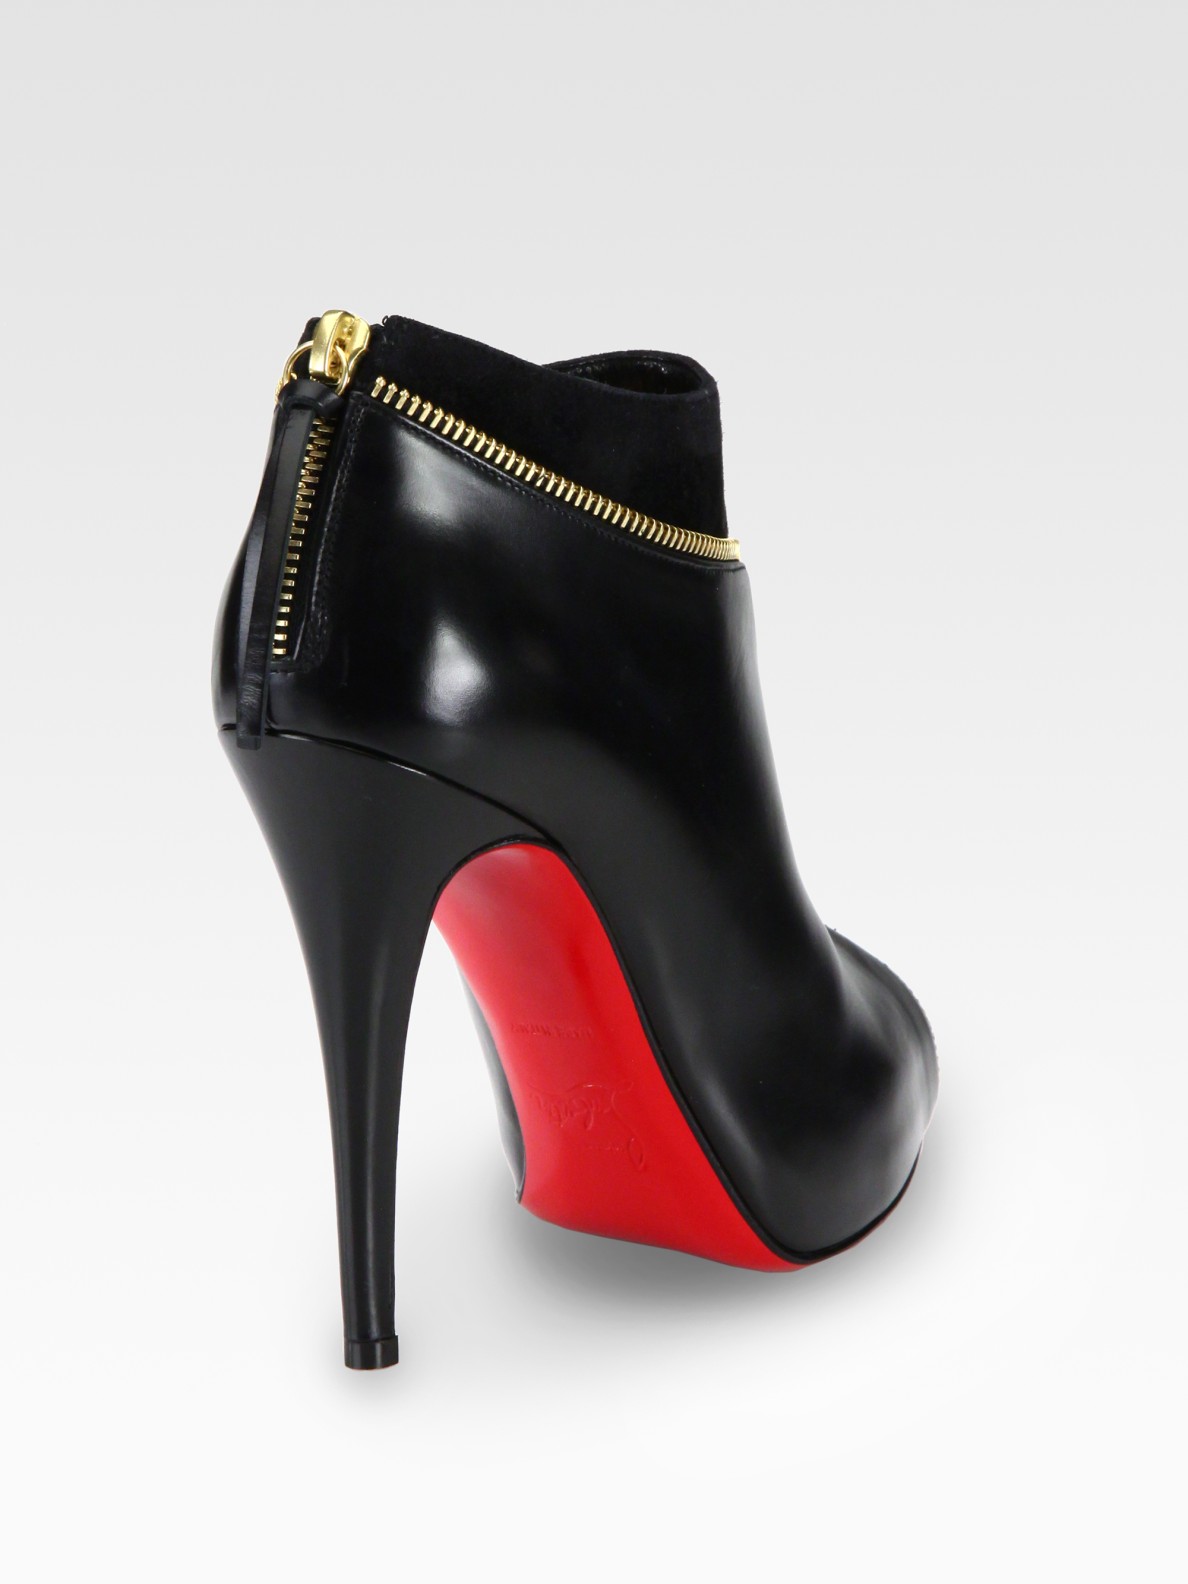 Christian Louboutin and Suede Zipper Ankle Boots Black Lyst